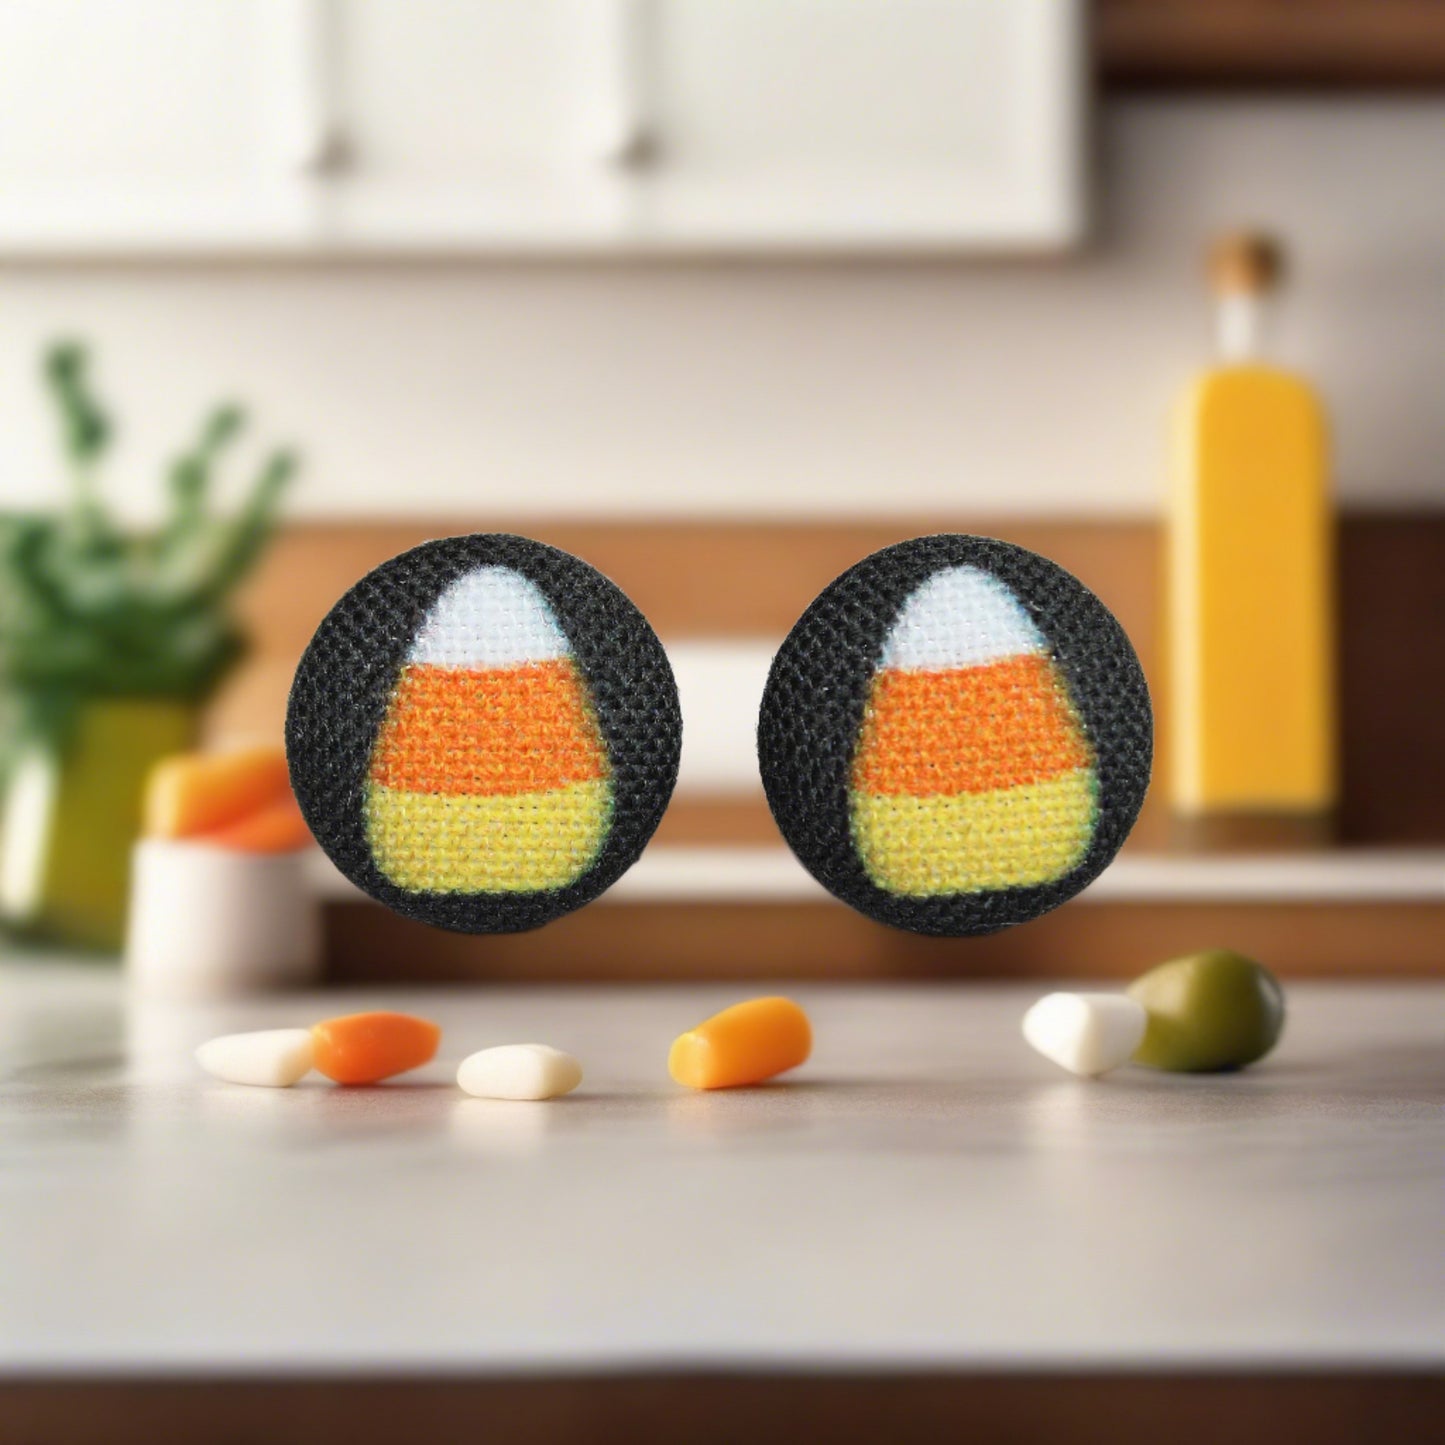 Candy Corn (small) Fabric button Stud Earrings